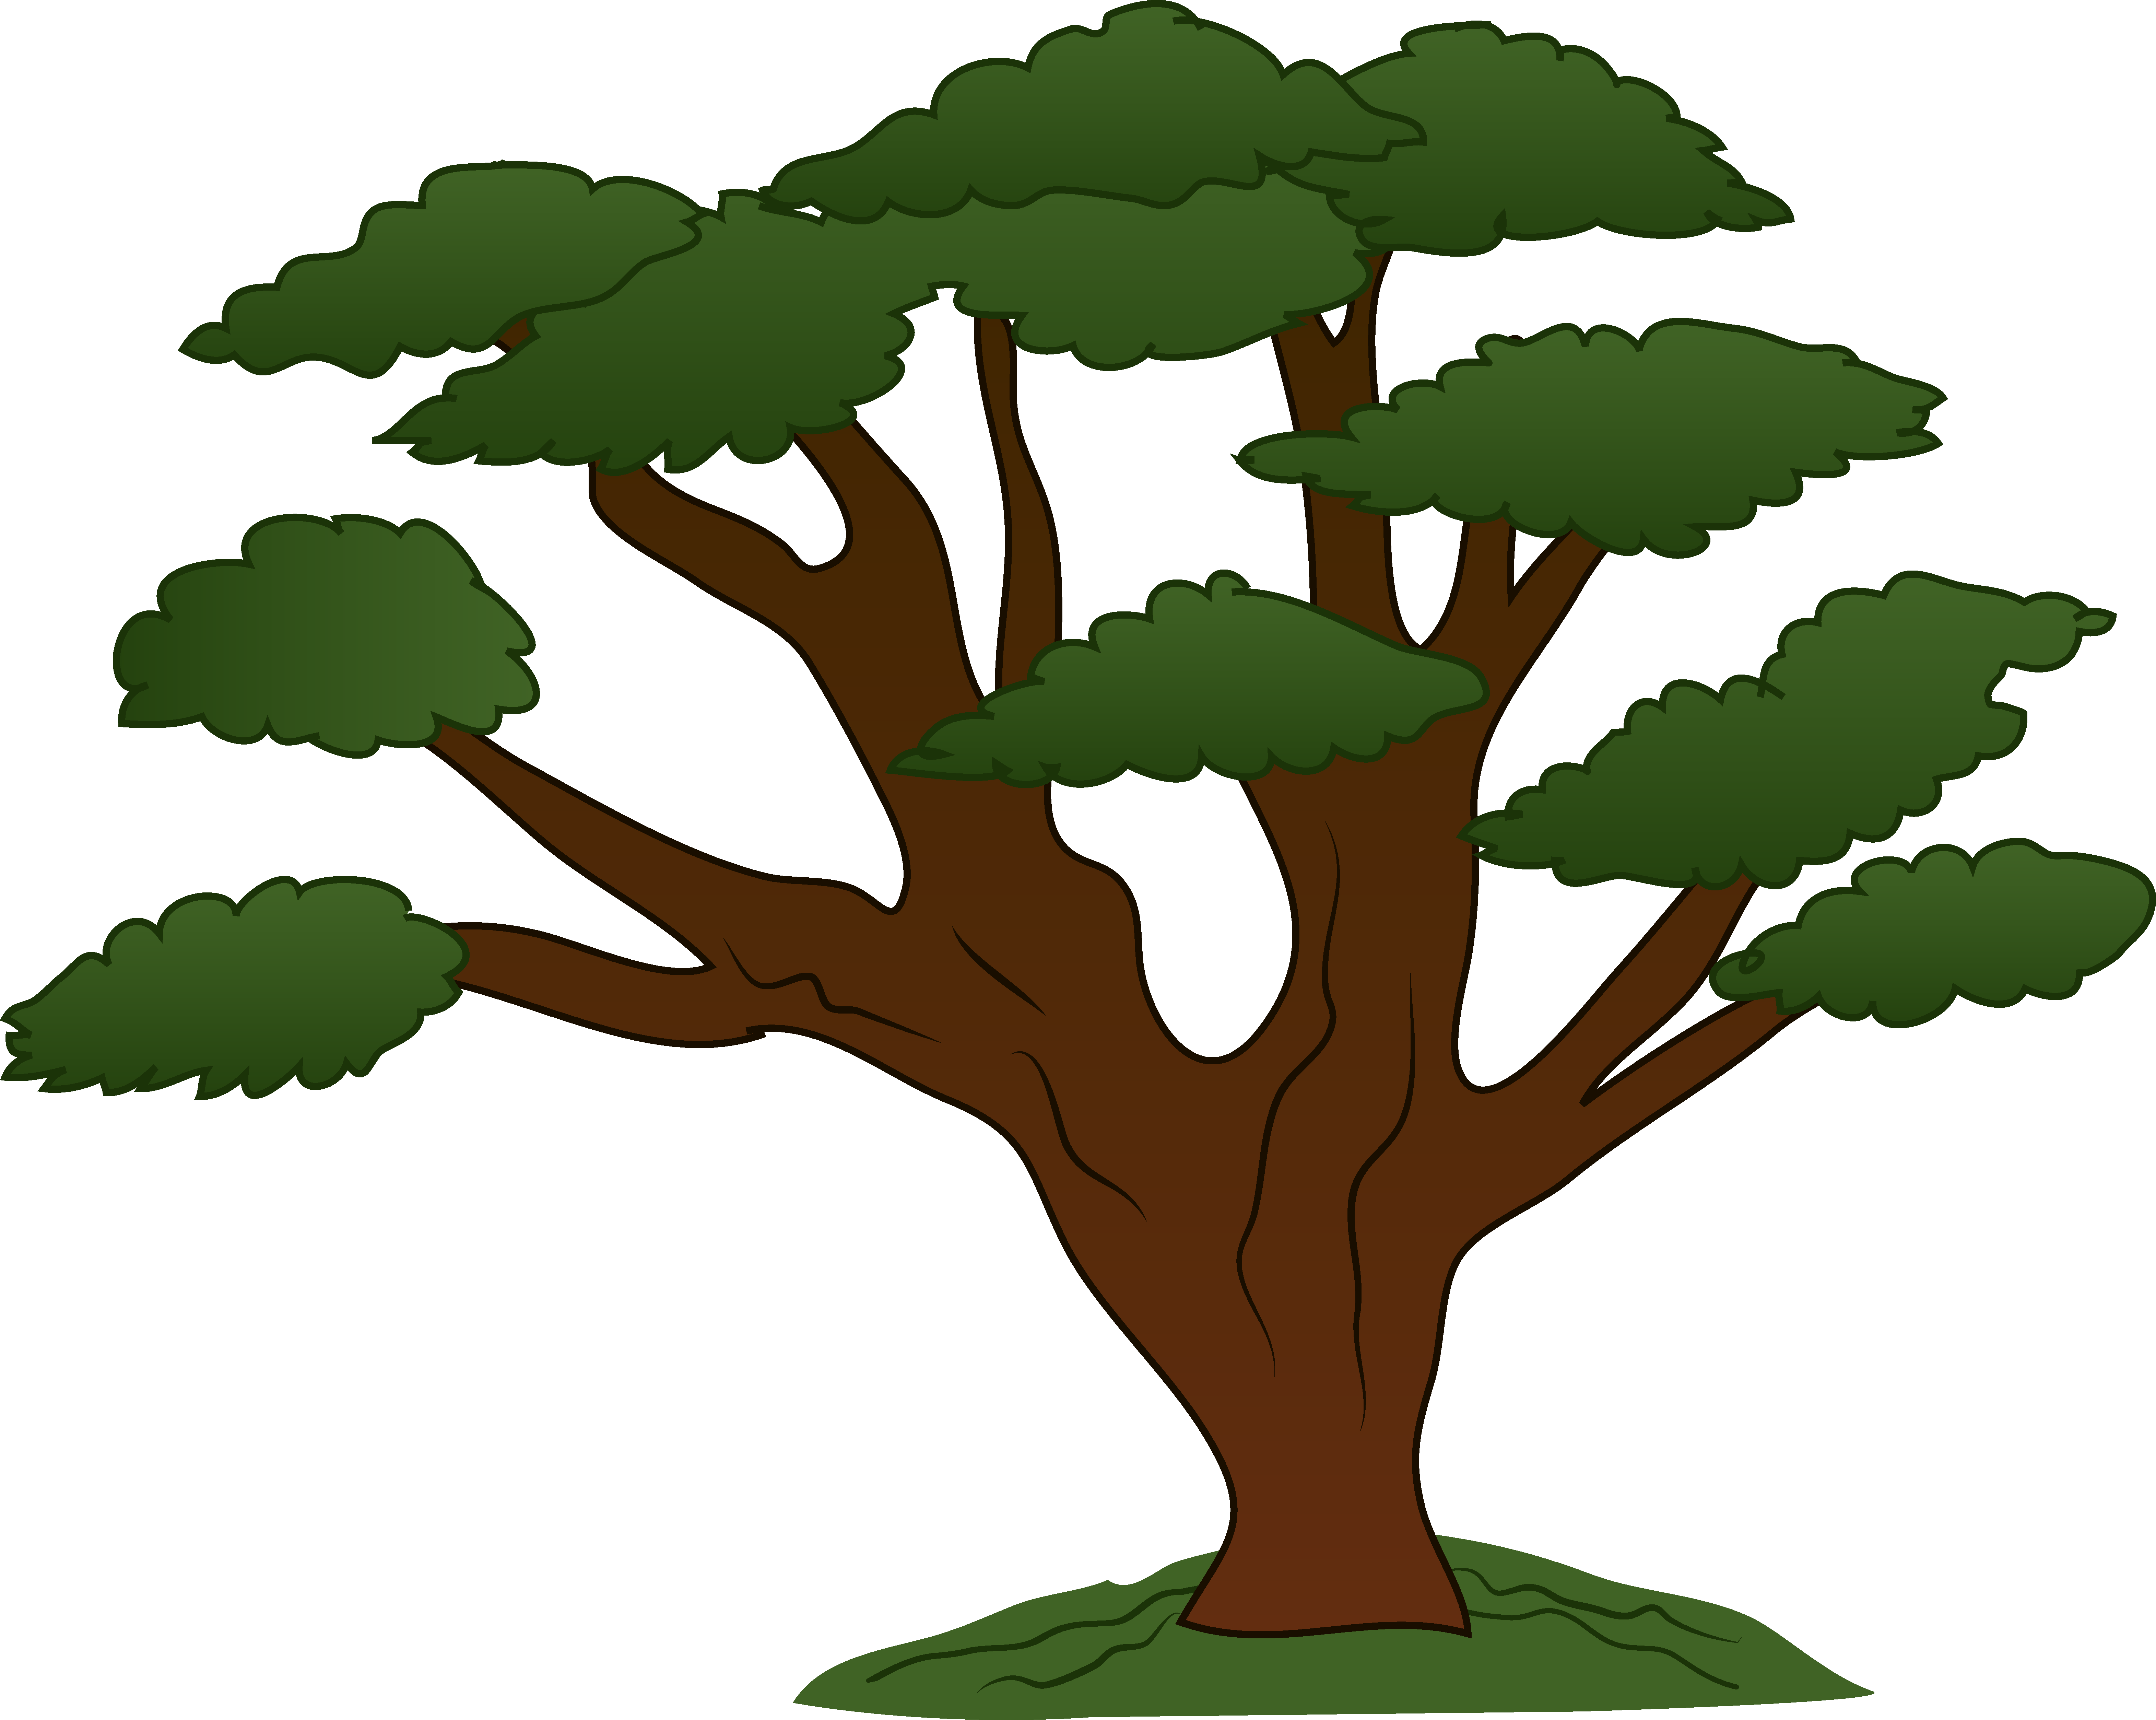 Clipart of a giant tree.